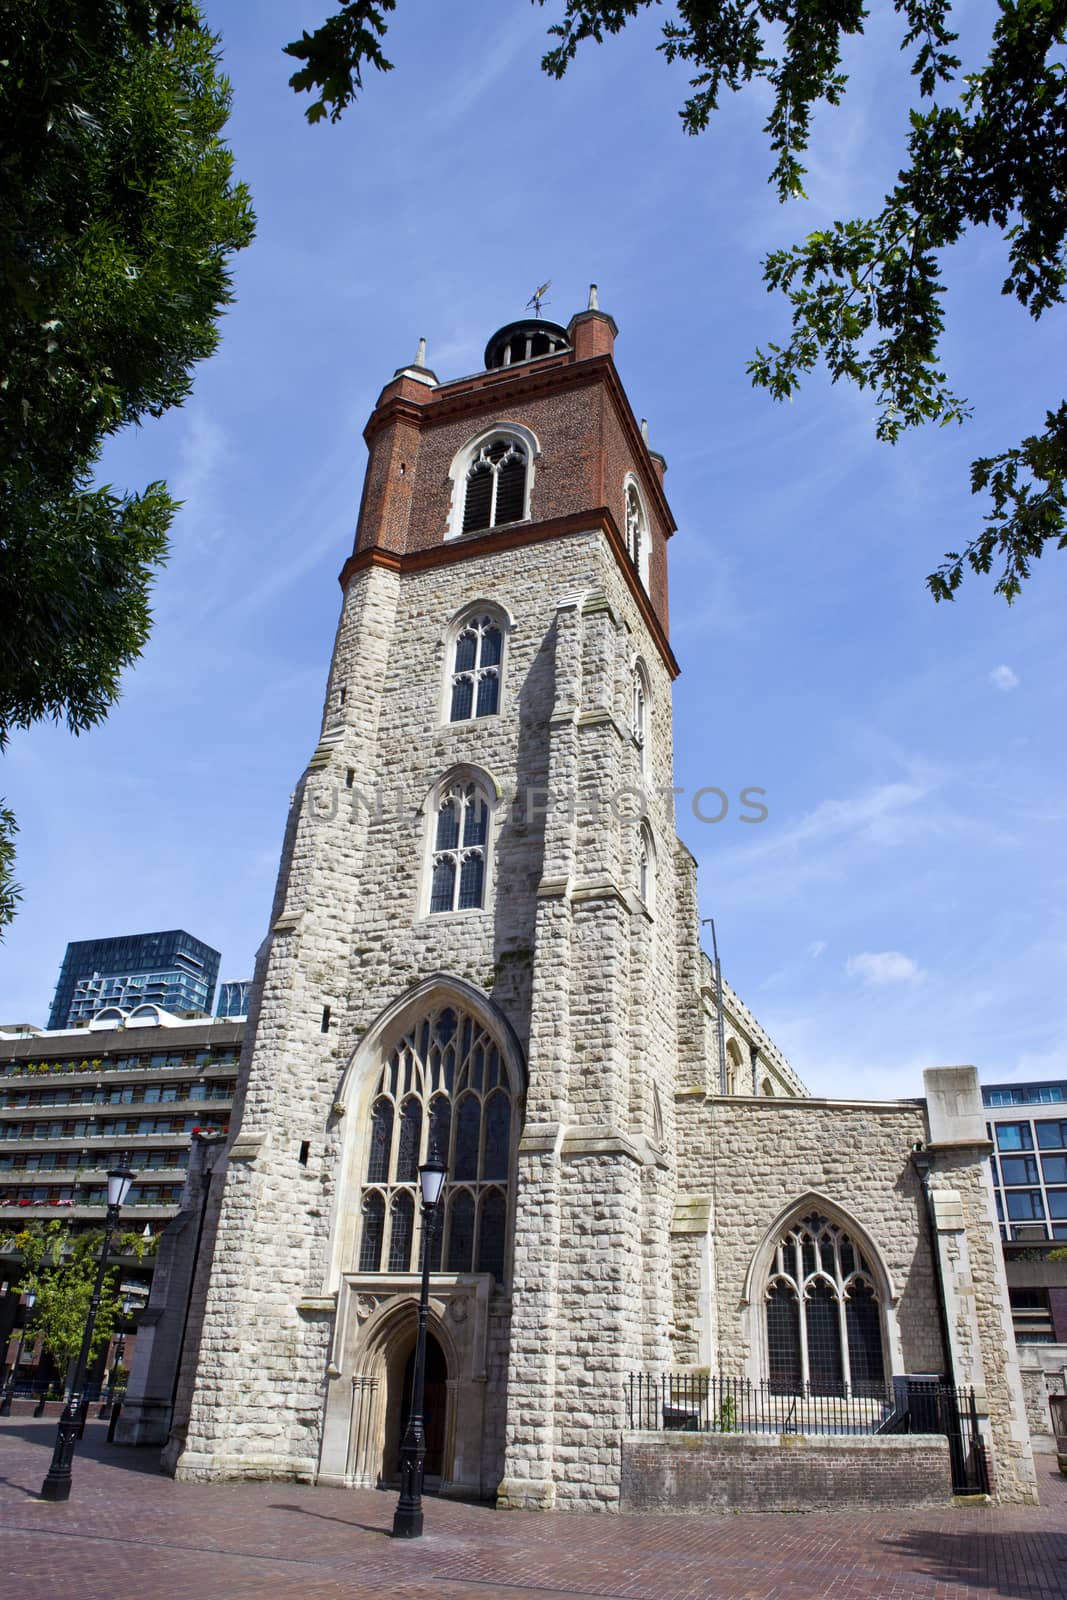 The historic St. Giles Without Cripplegate Church located in the Barbican Estate in London.